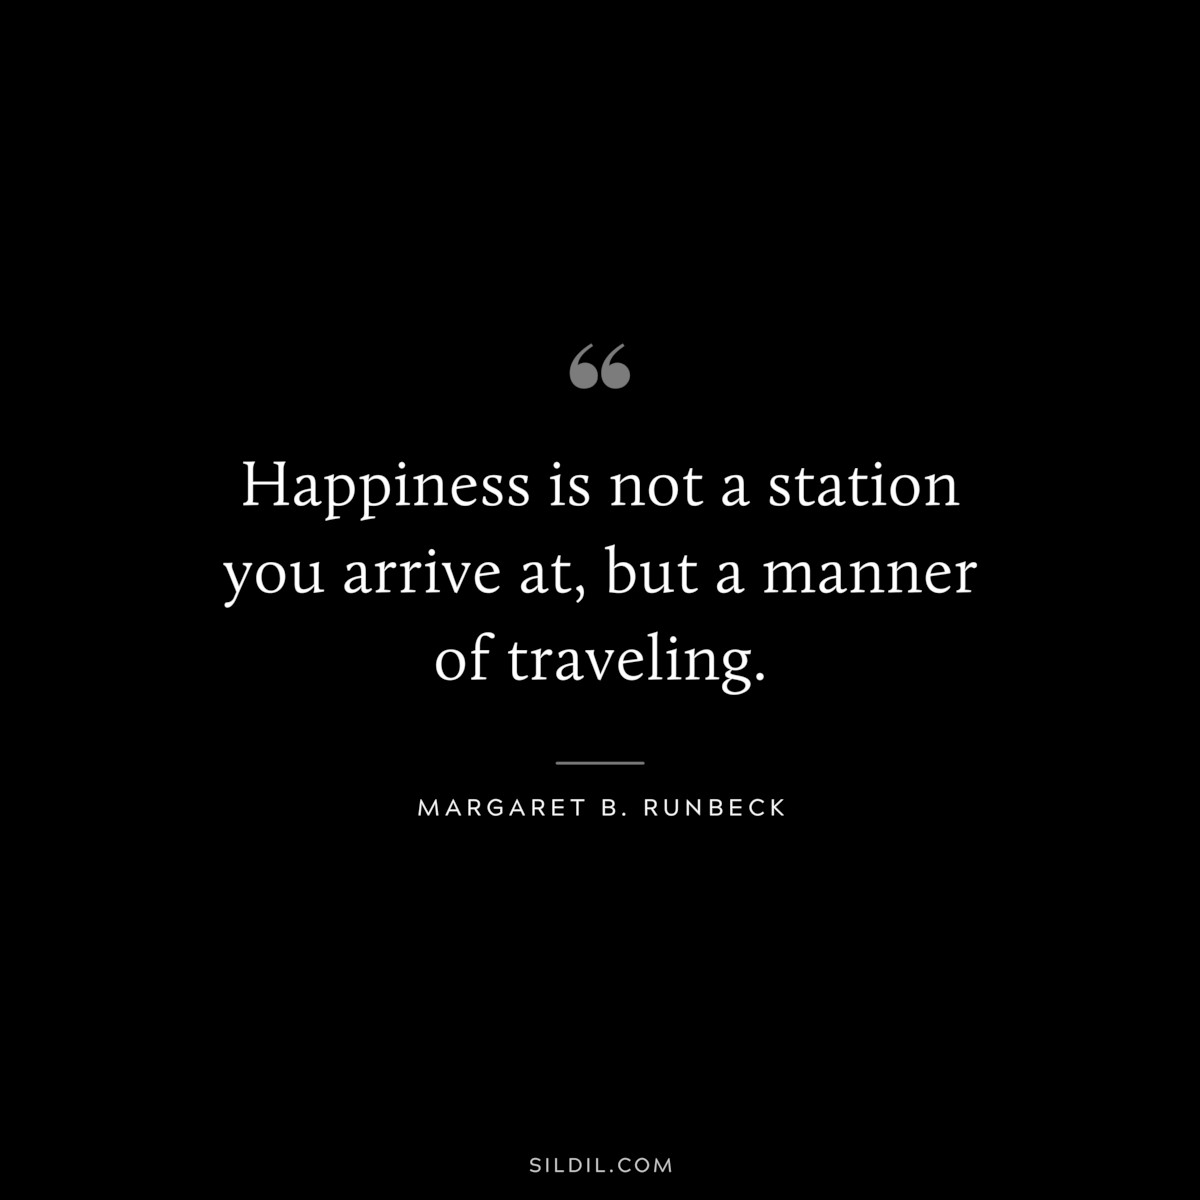 Happiness is not a station you arrive at, but a manner of traveling. ― Margaret B. Runbeck